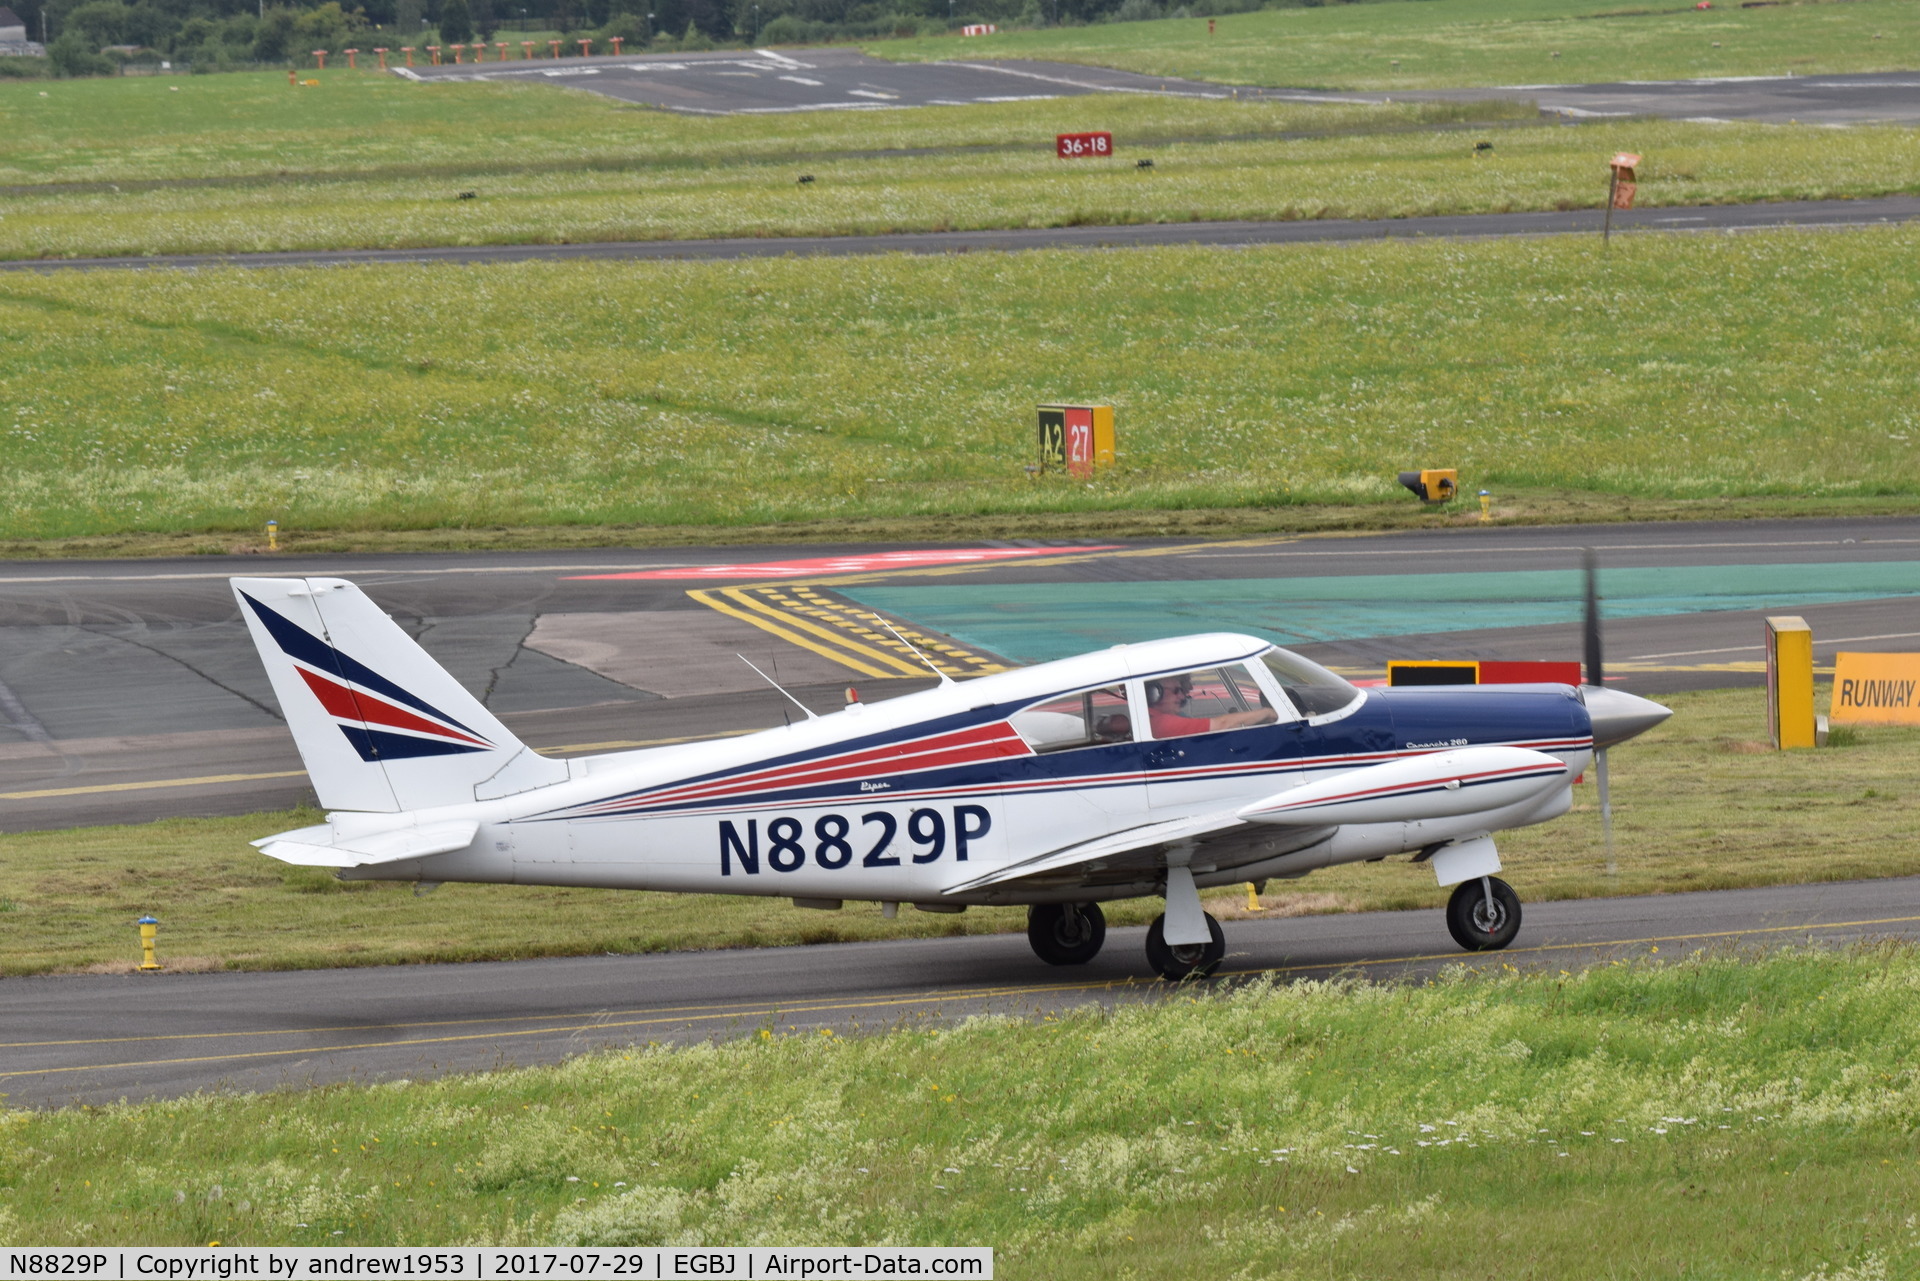 N8829P, 1965 Piper PA-24-260 Comanche C/N 24-4285, N8829P at Gloucestershire Airport.